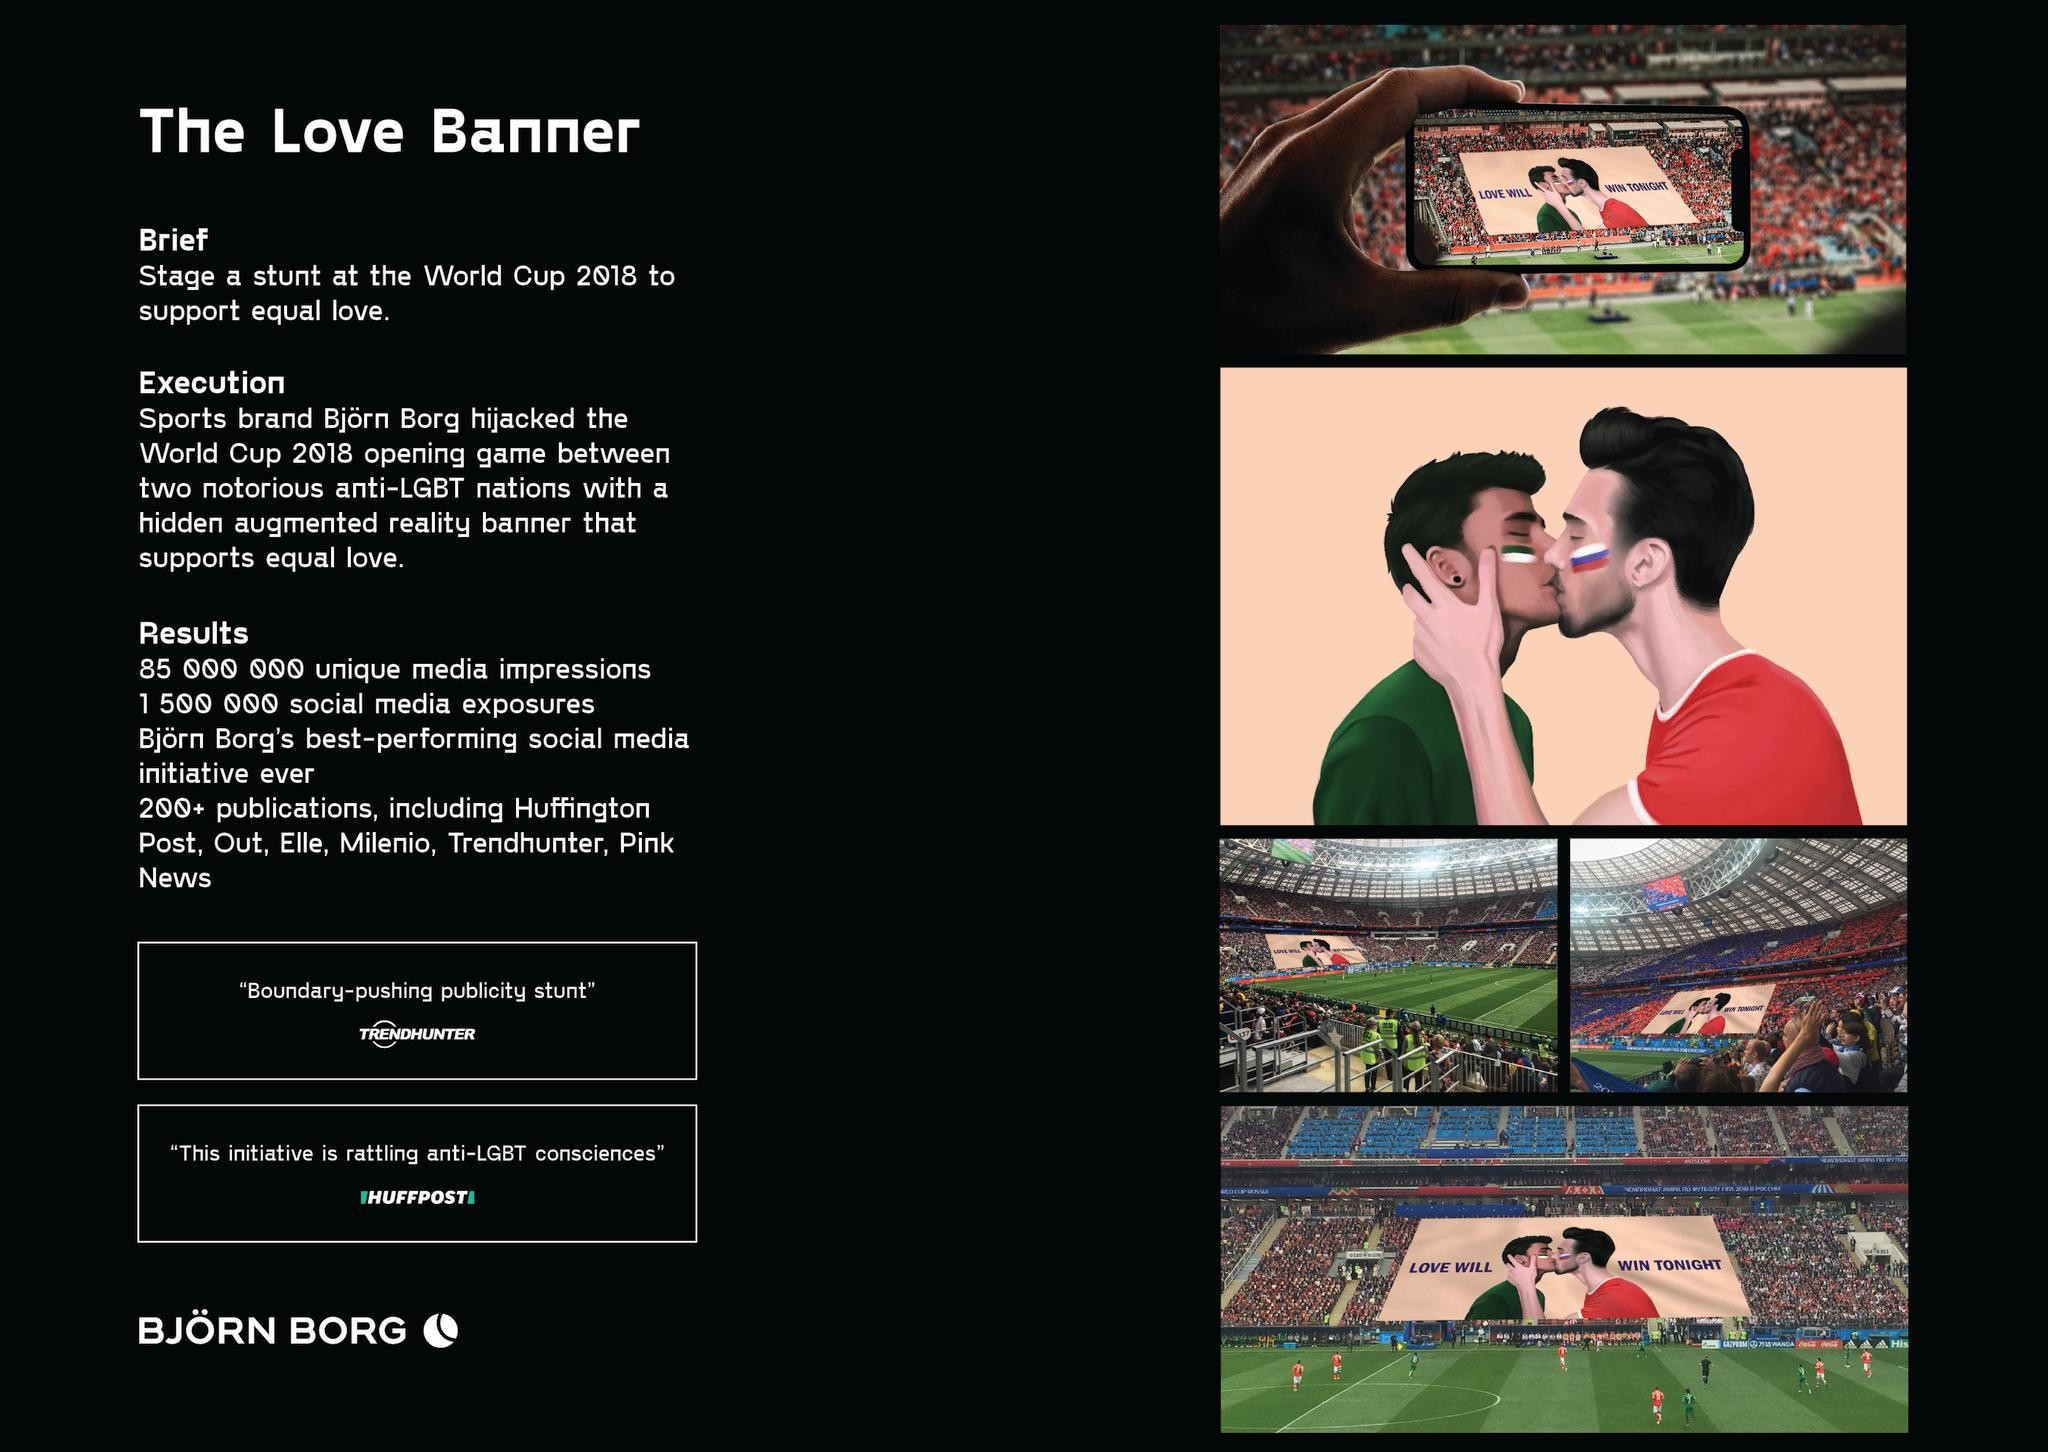 The Love Banner